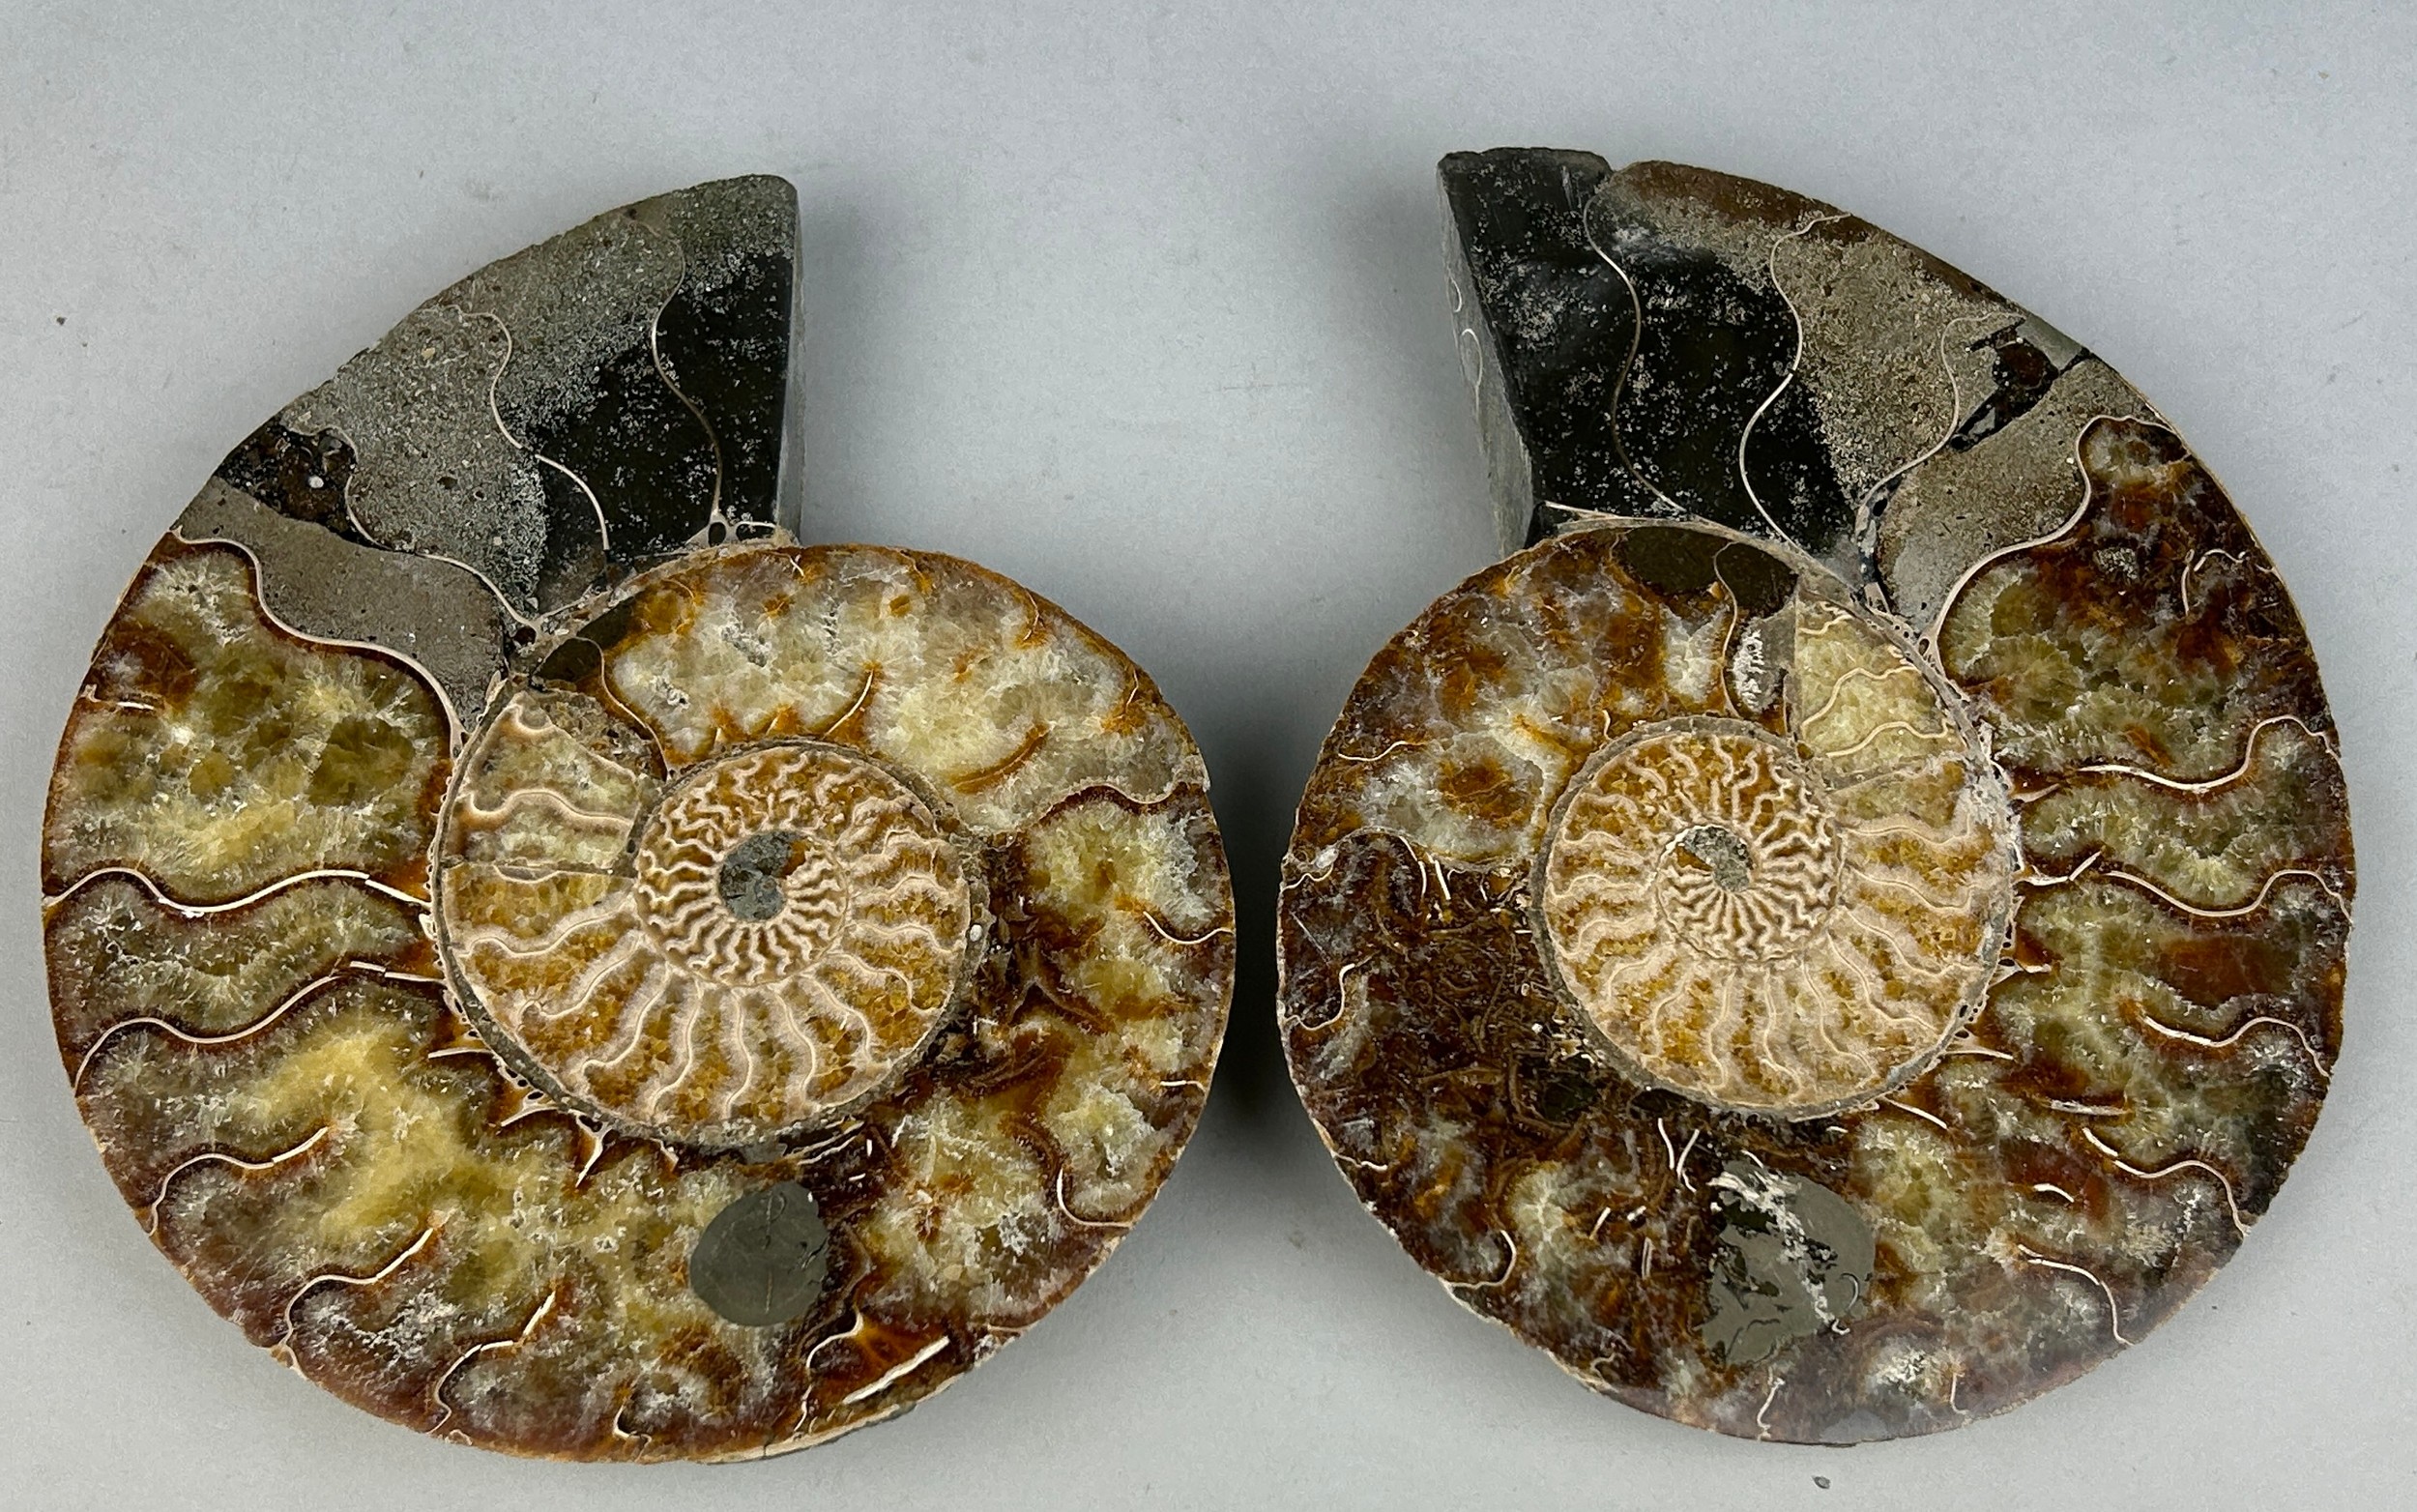 A VERY LARGE CUT AND POLISHED AMMONITE FOSSIL 20cm x 16cm each A very large Ammonite Fossil from